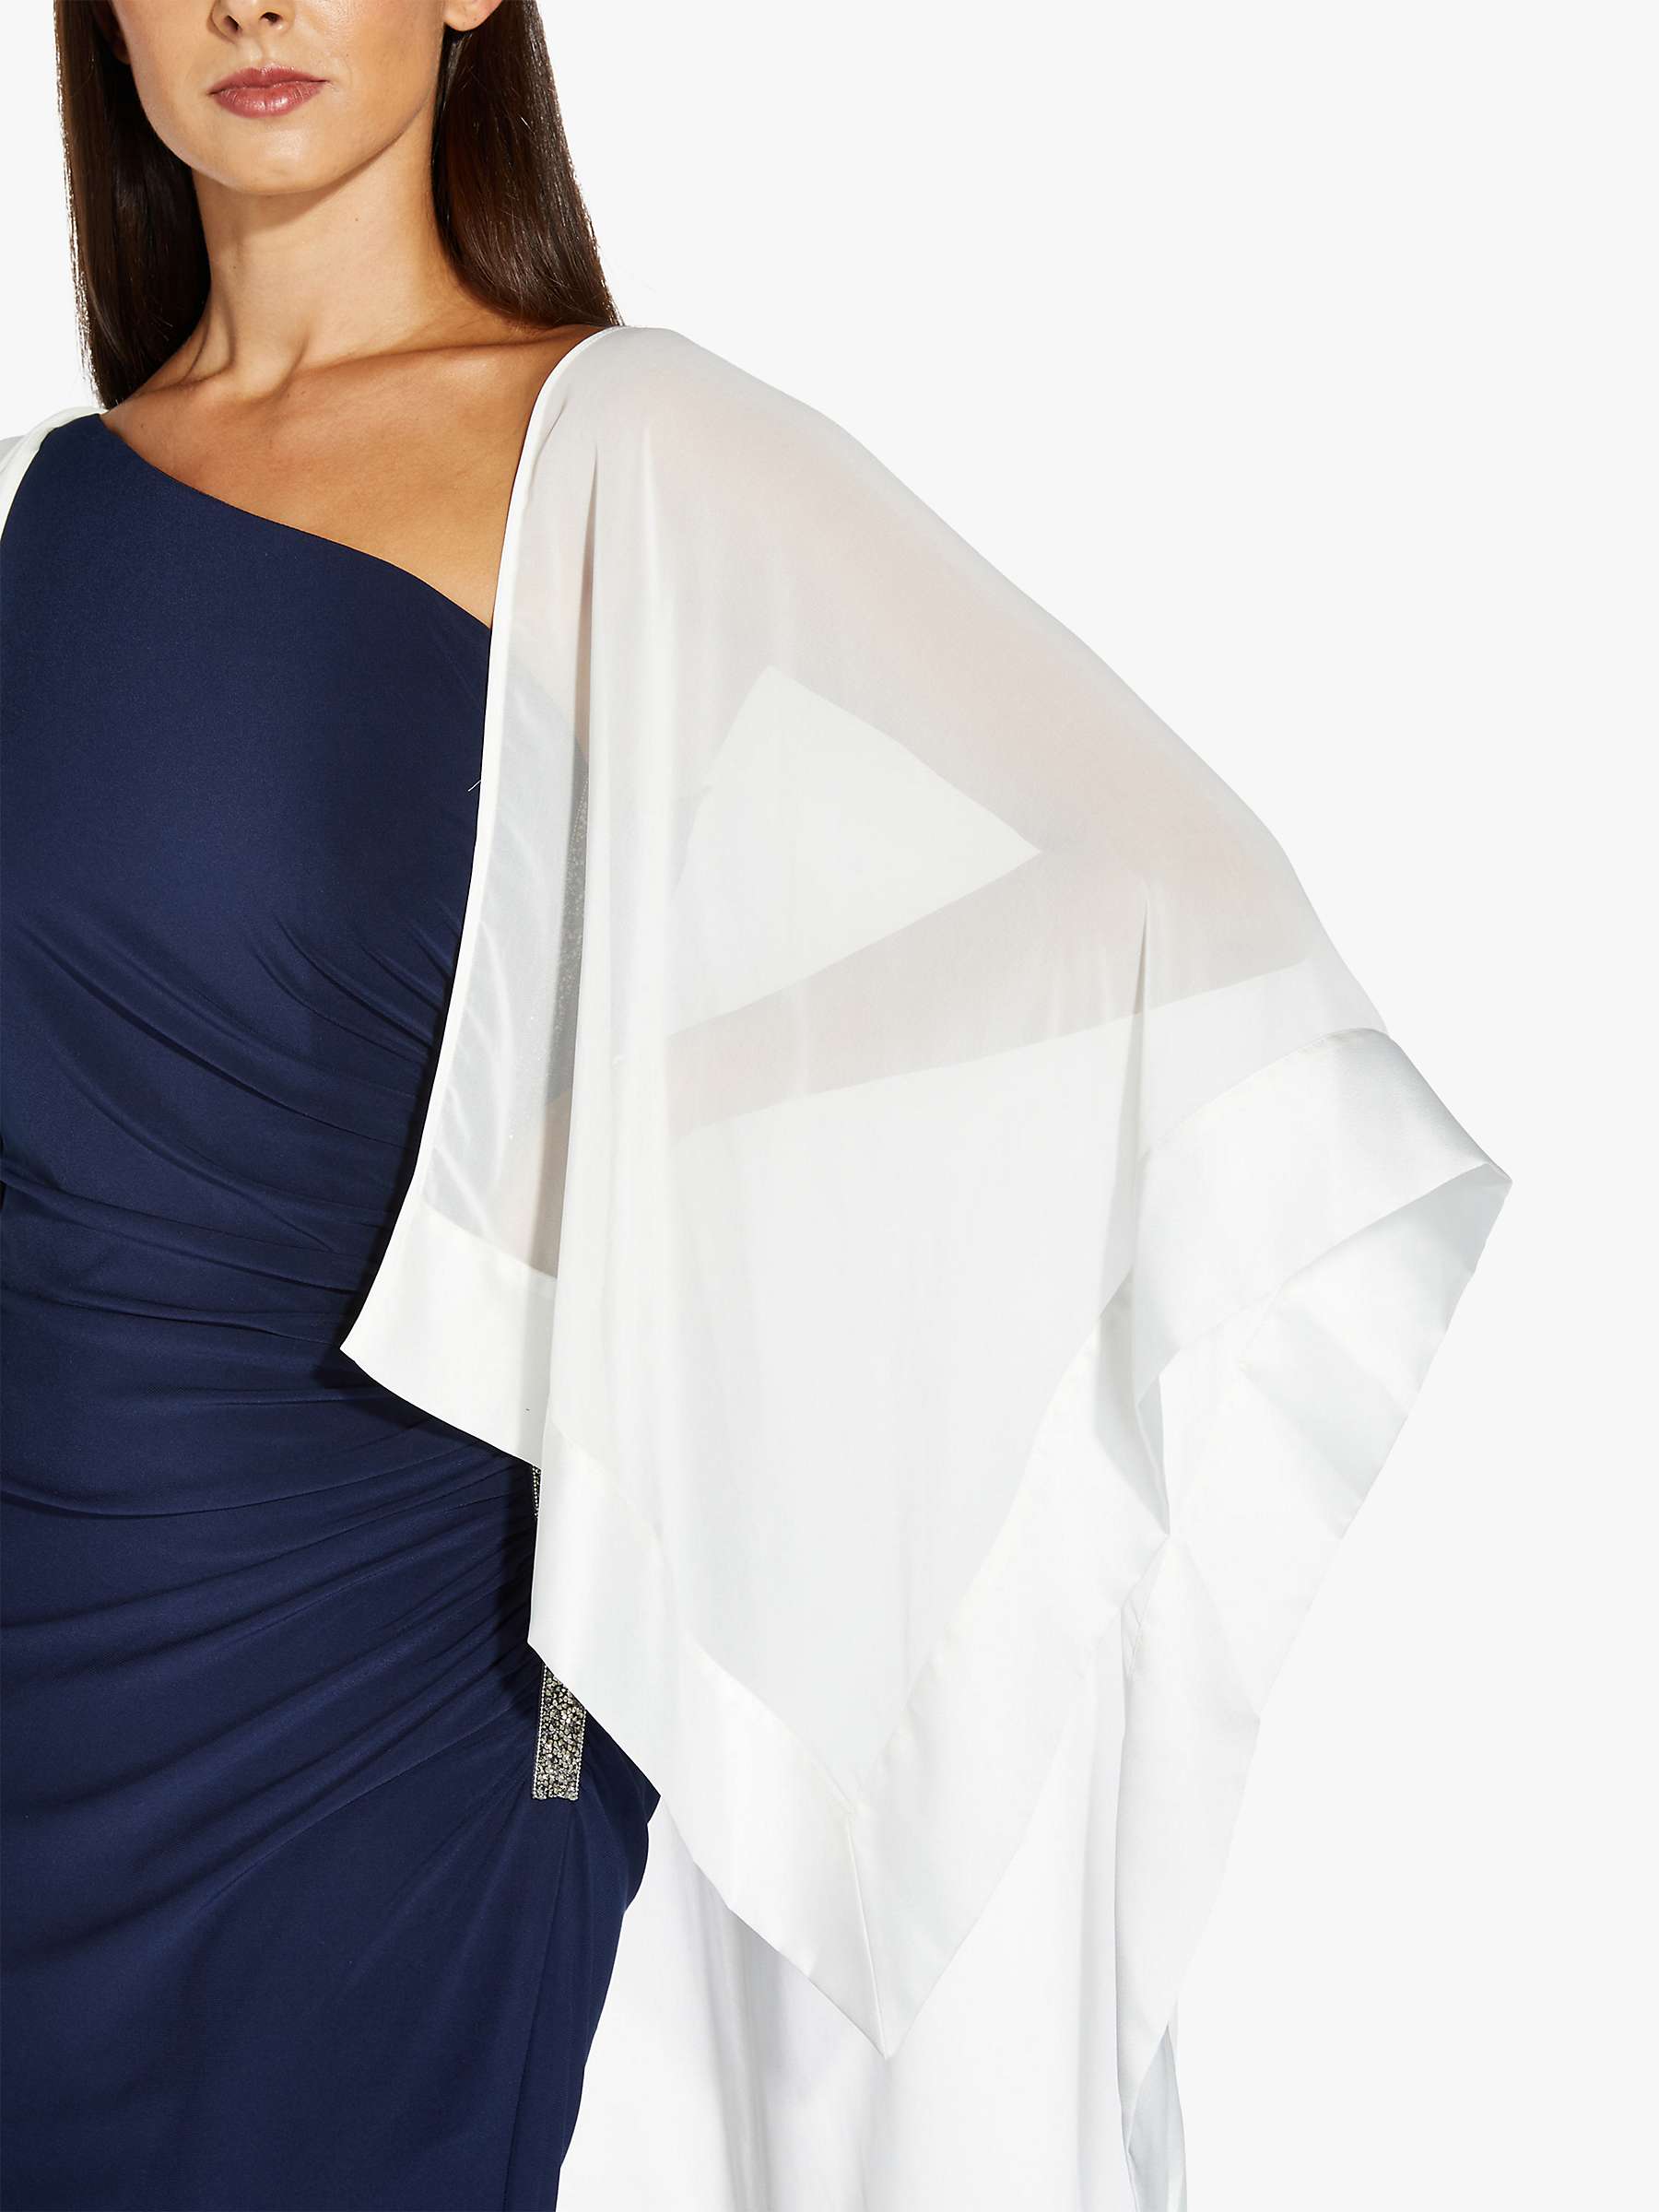 Buy Adrianna Papell Chiffon Cape Coverup, Ivory Online at johnlewis.com